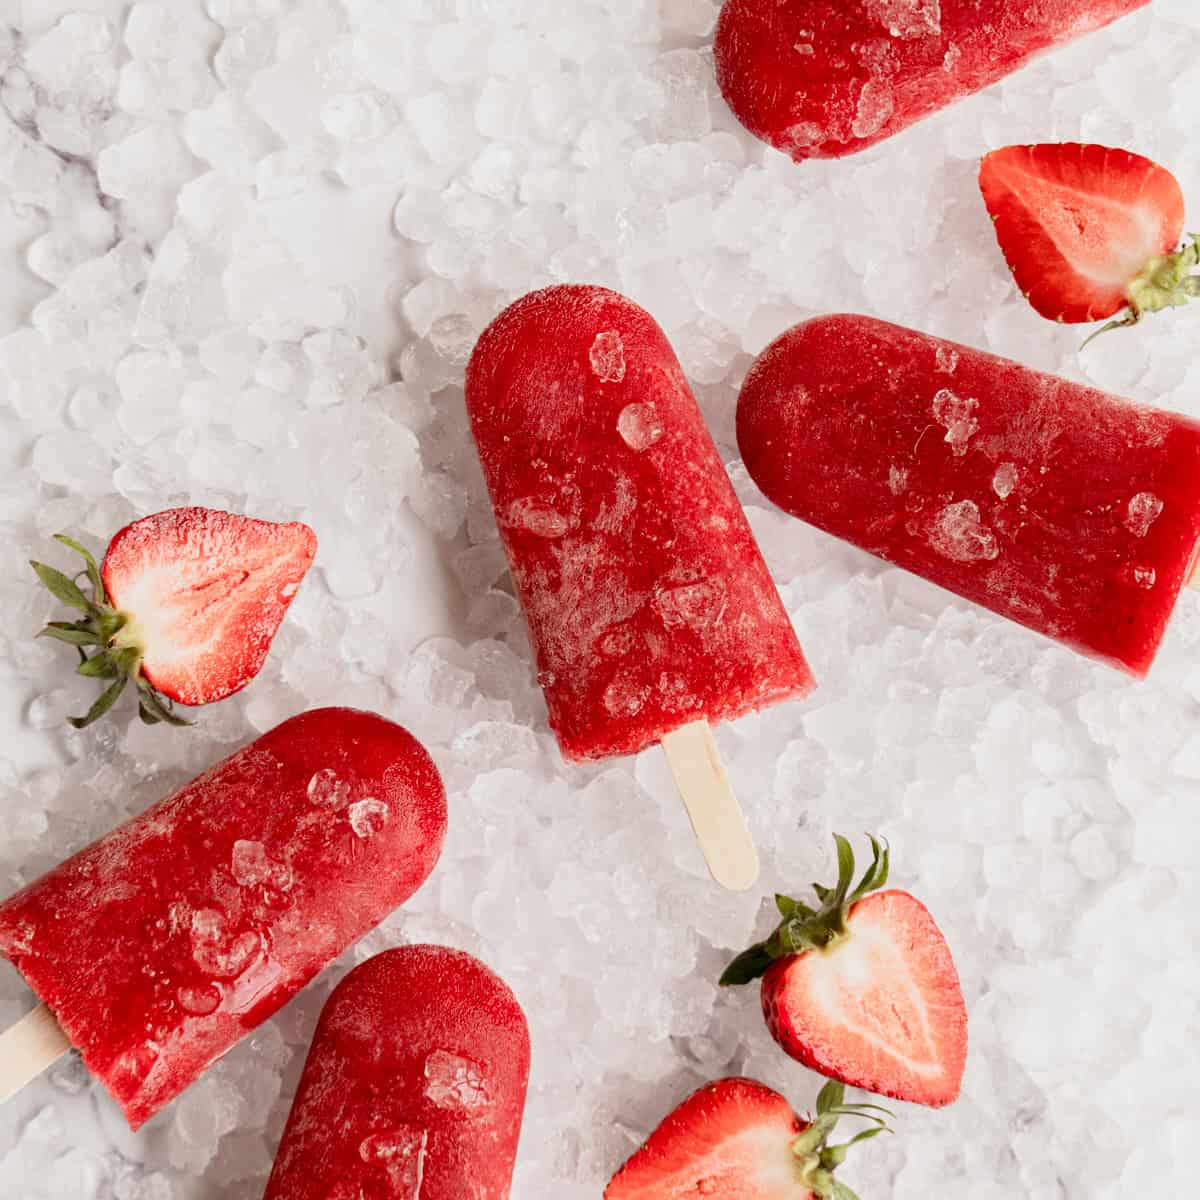 strawberry-popsicles-with-real-strawberries-featured.